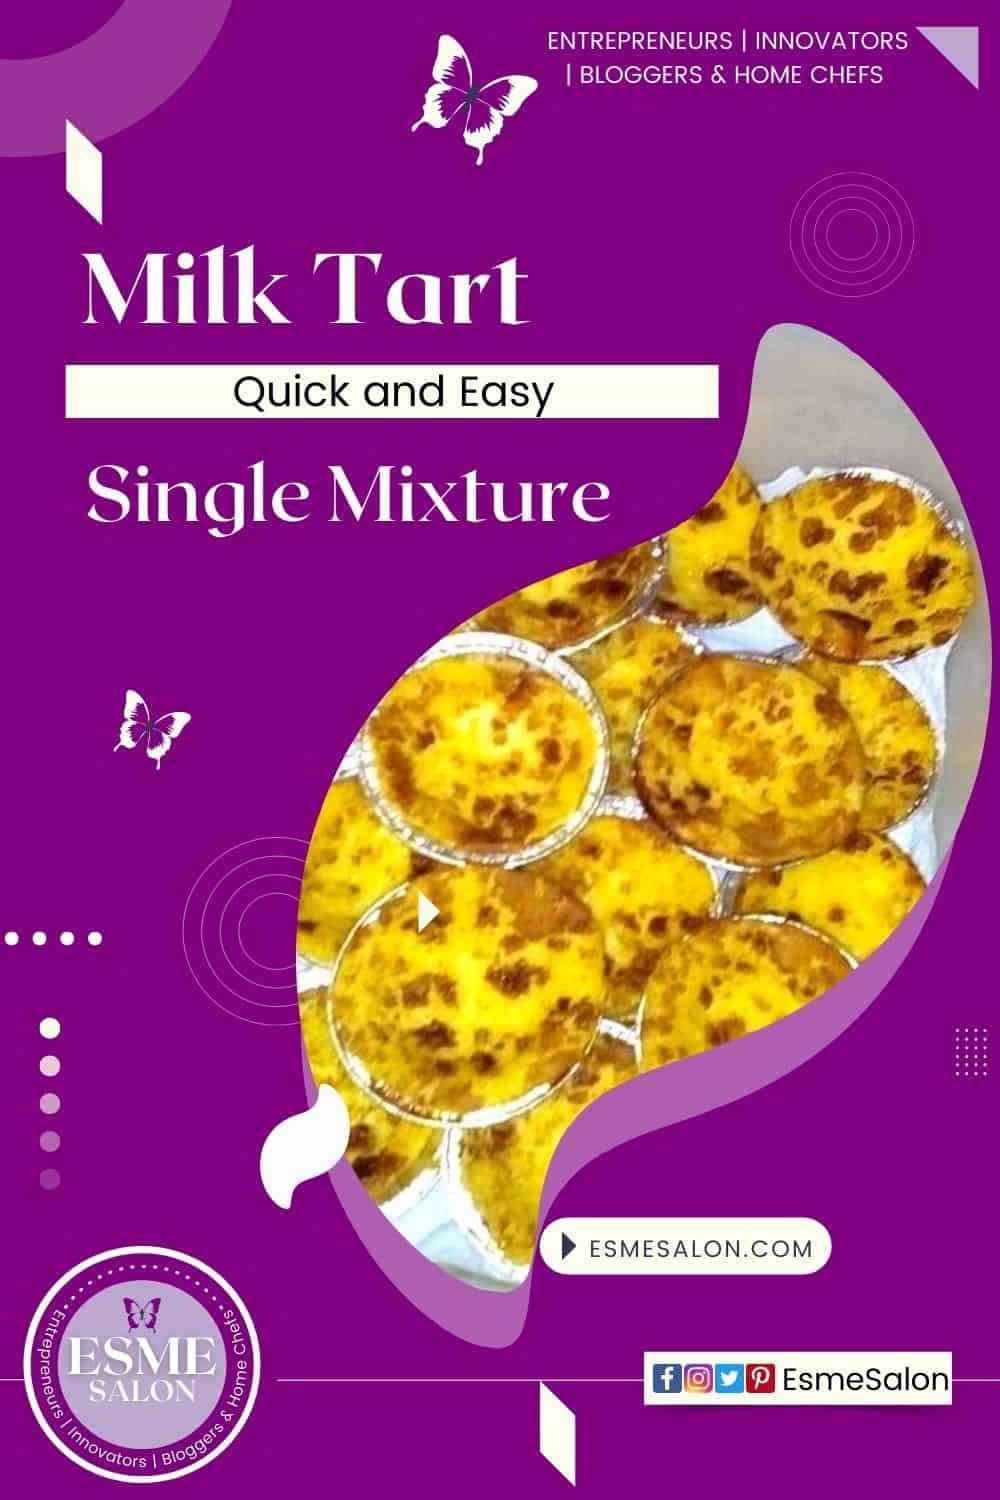 Image of small Single Mixture Milk Tart in a small tinfoil casing